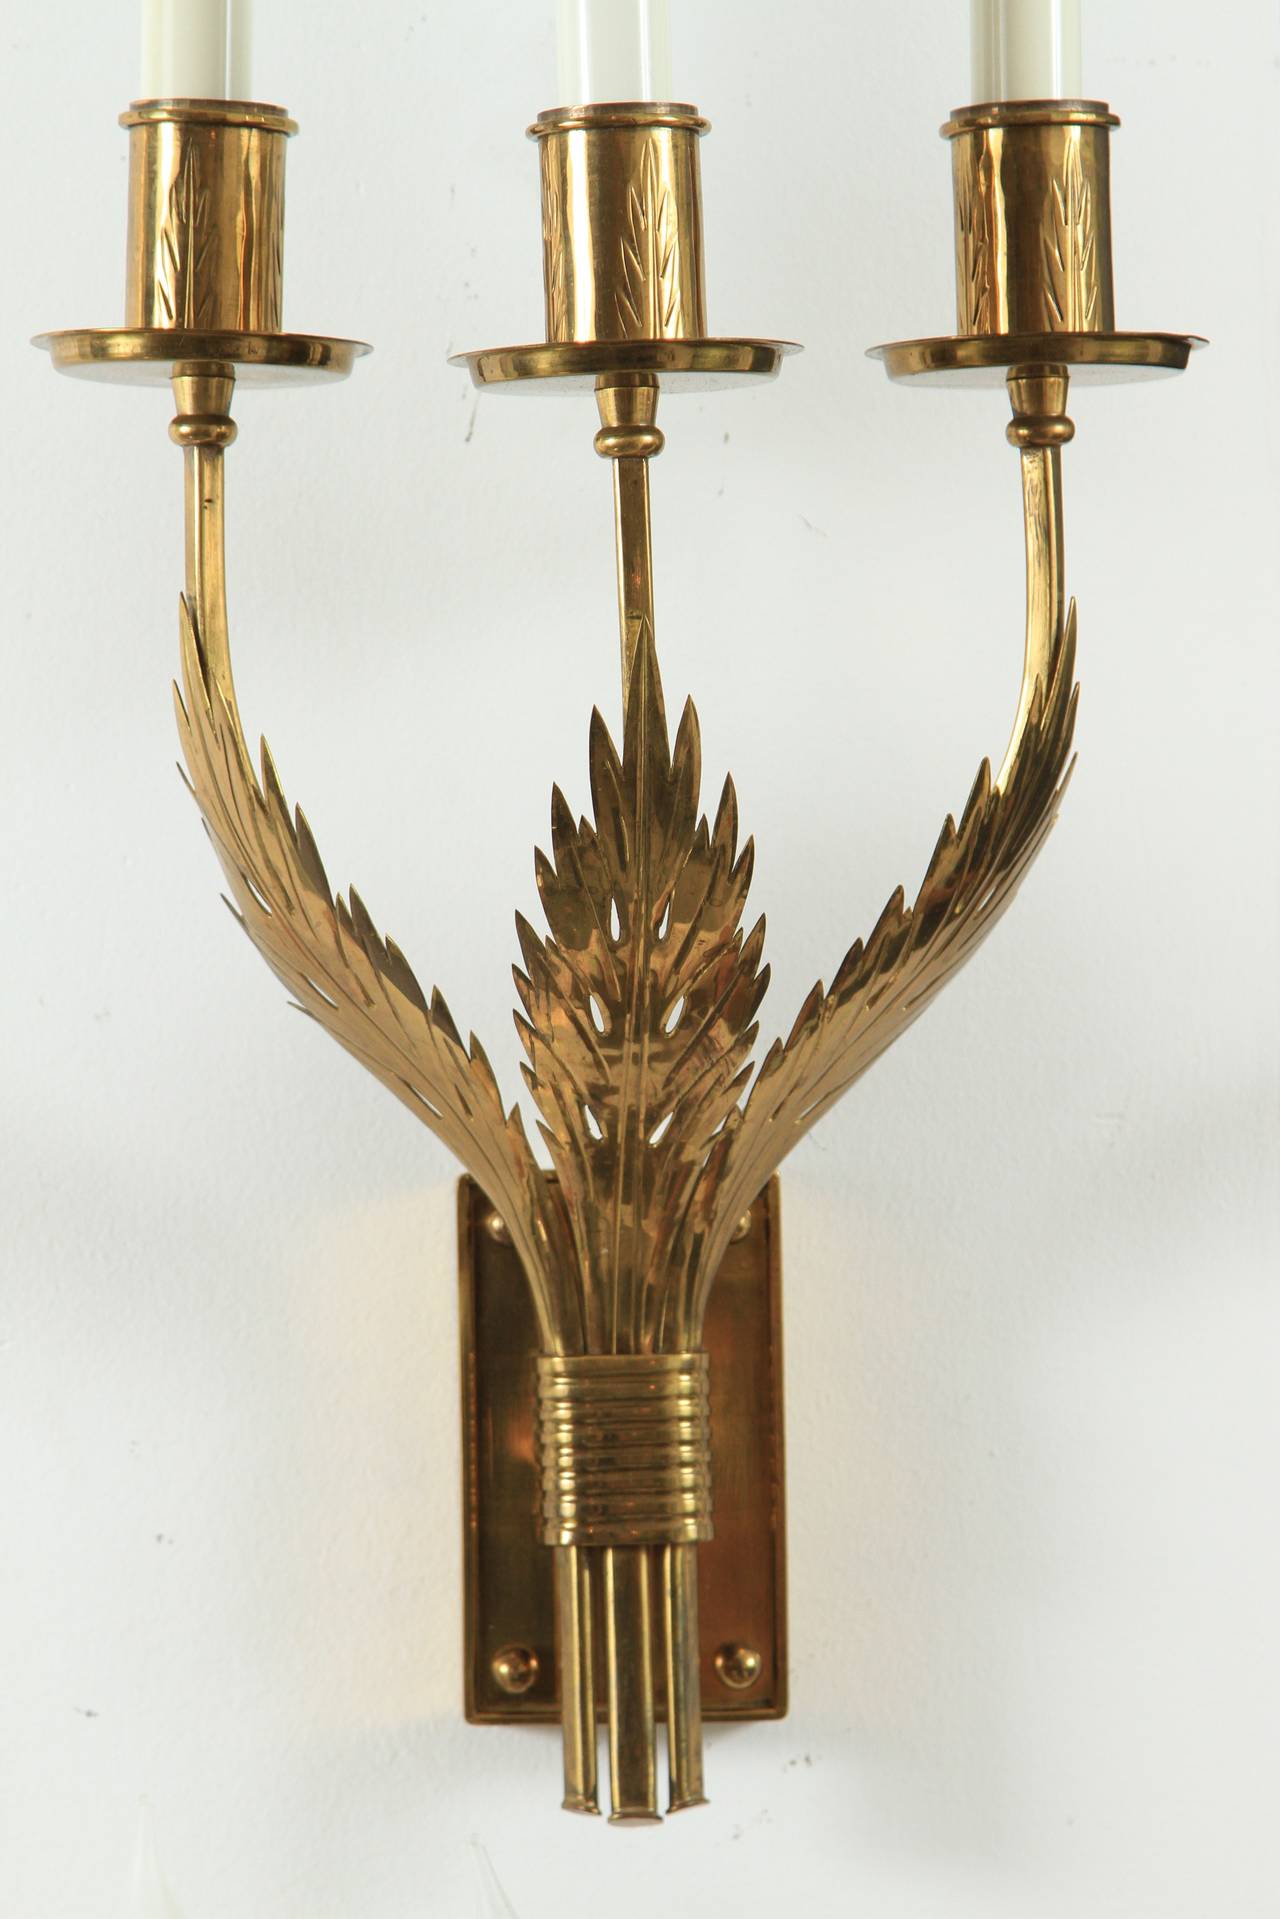 Lovely and elegant group of brass candelabra sconces featuring an acanthus leaf motif were designed by Tommi Parzinger from one of his most important  commissions, the Appleman residence in Ocean, New Jersey.  Leaf design is also imprinted on each